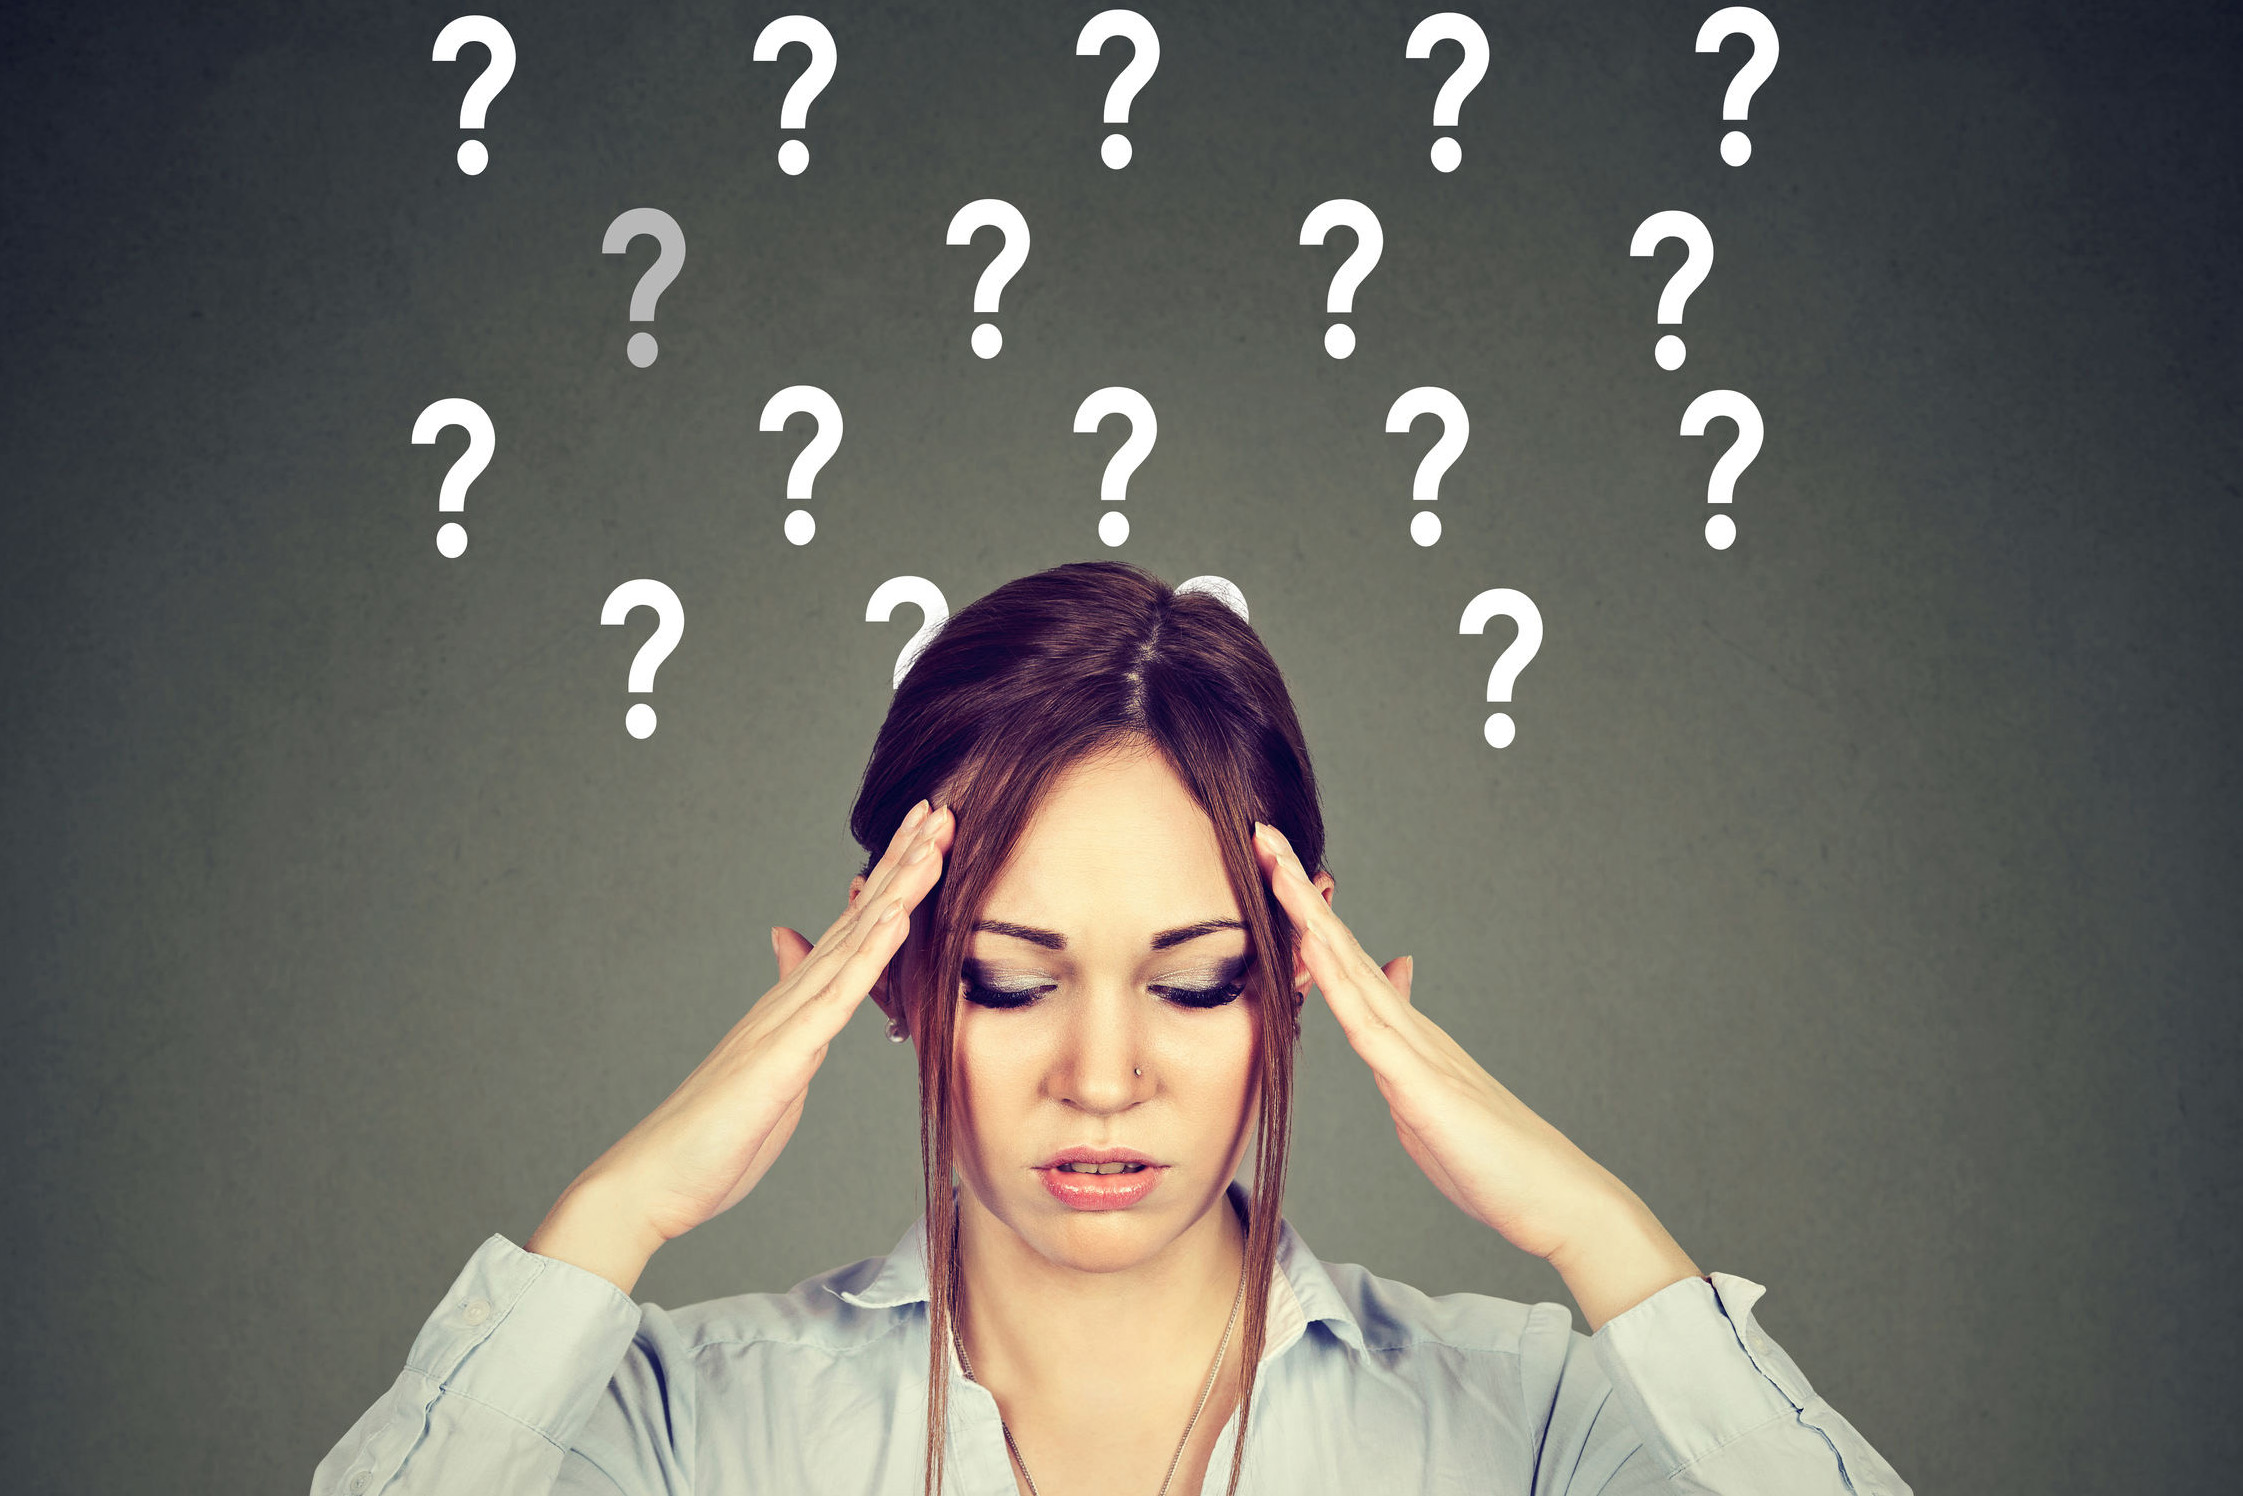 79952173 - anxious stressed woman with question marks on gray background